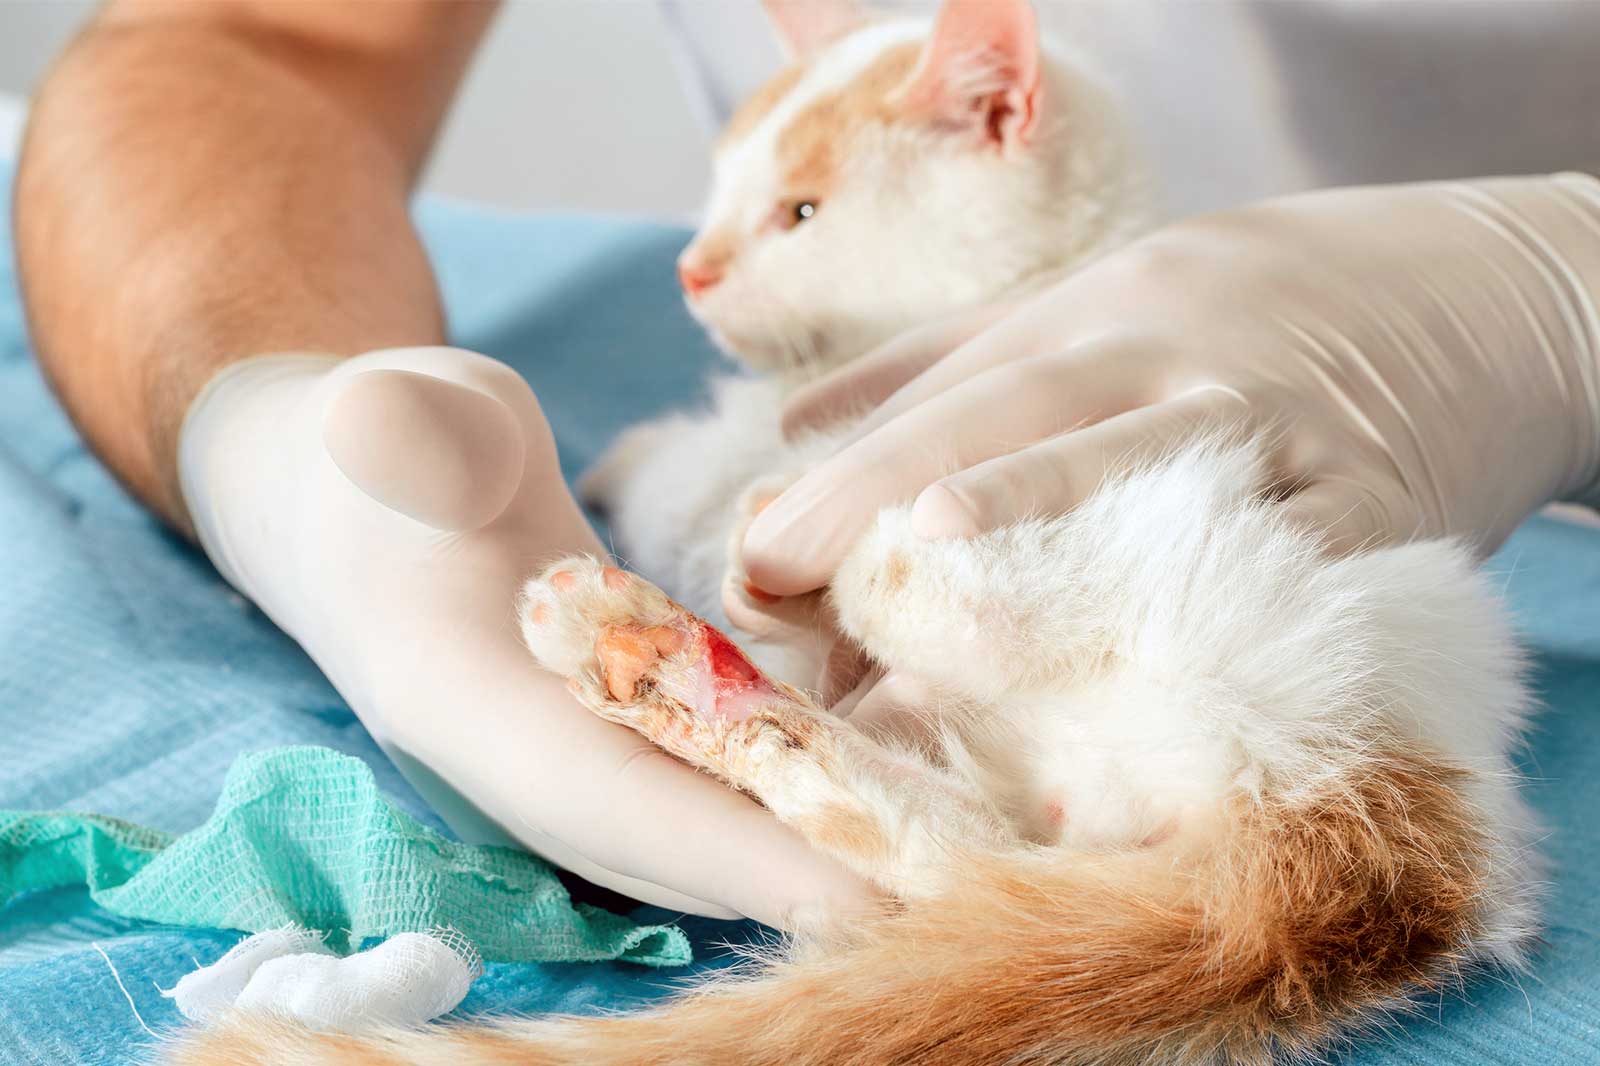 makiandampars - wound management in cats